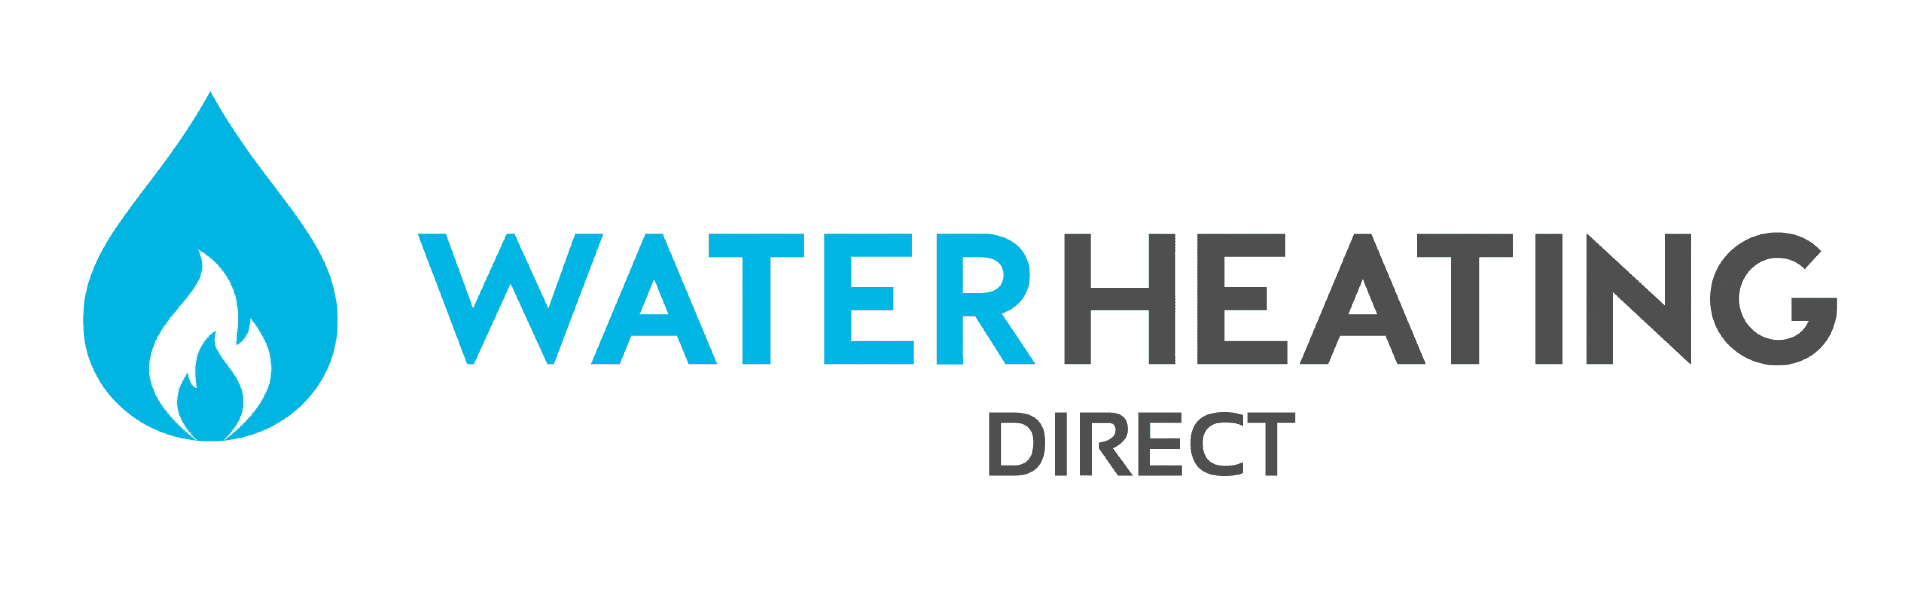 About Us - Water Heating Direct logo